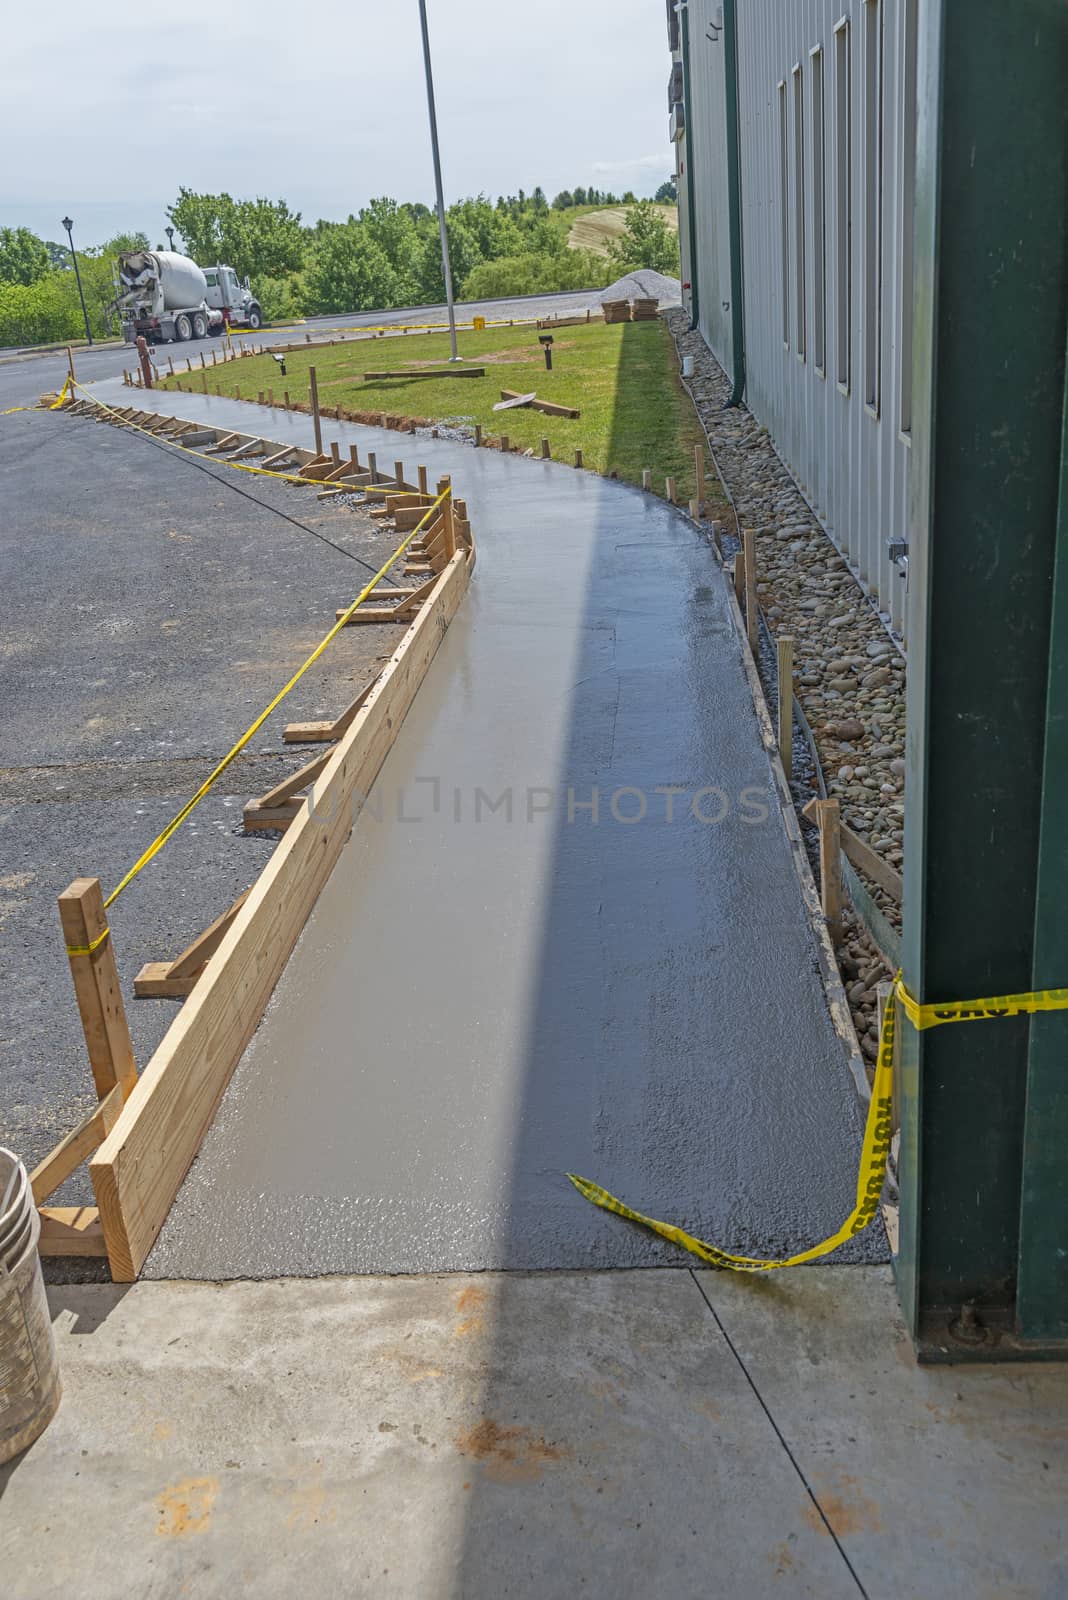 New Just Poured Concrete Sidewalk With Framing by stockbuster1